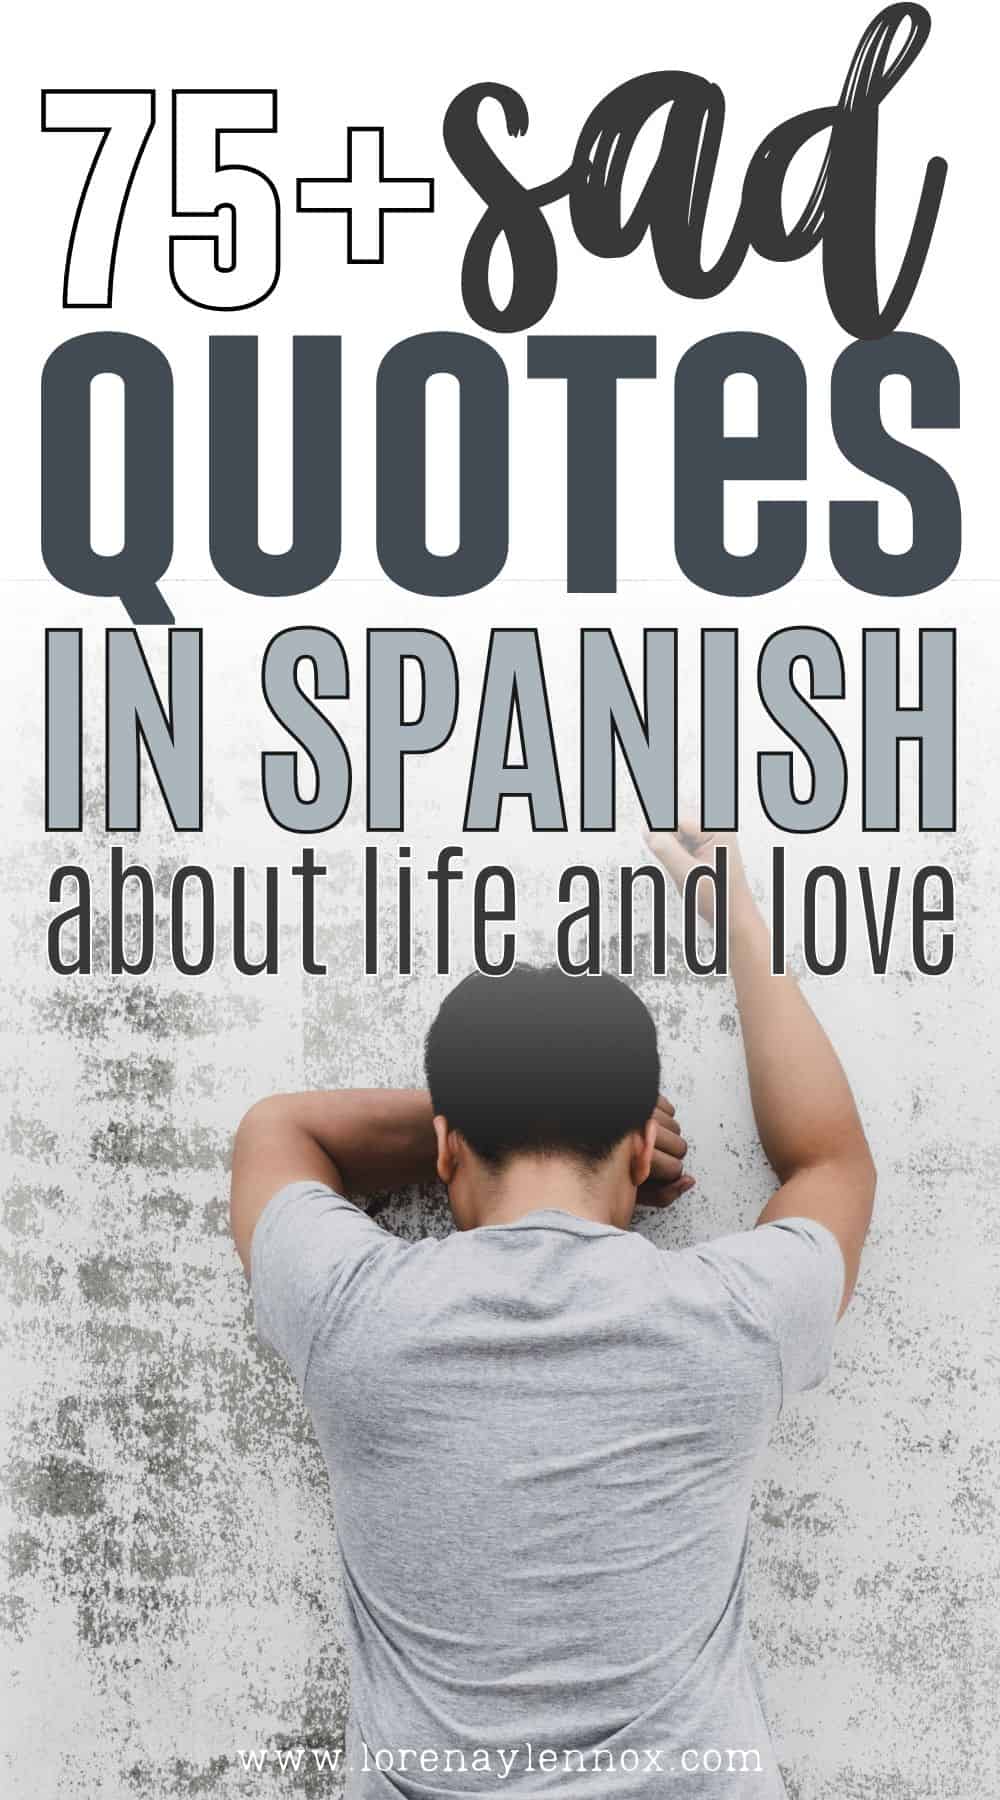 I hope that browsing through this list of sad quotes in Spanish can serve as comfort for those of you going through challenging times. Make sure to check out my list of positive quotes in Spanish afterwards to pick you up and remember that these times will come and go. There is always room for hope and renewal.